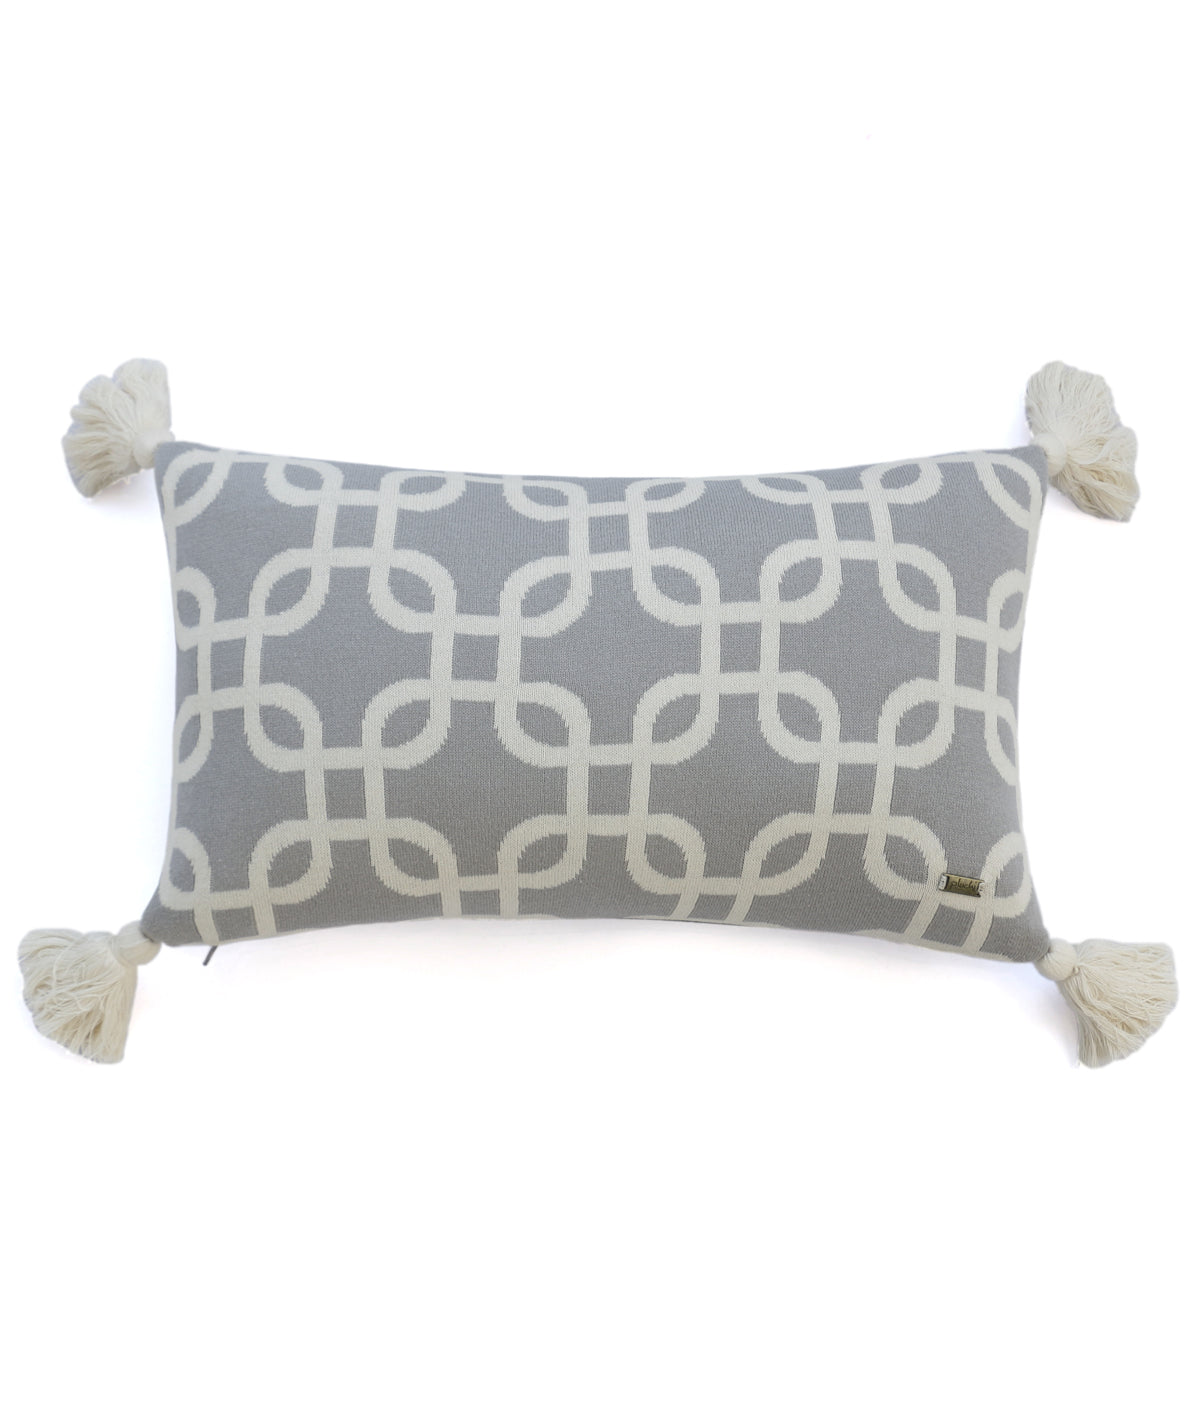 Stroke Cotton Knitted Decorative Light Grey & Natural Color 12 x 20 Inches Pillow Covers